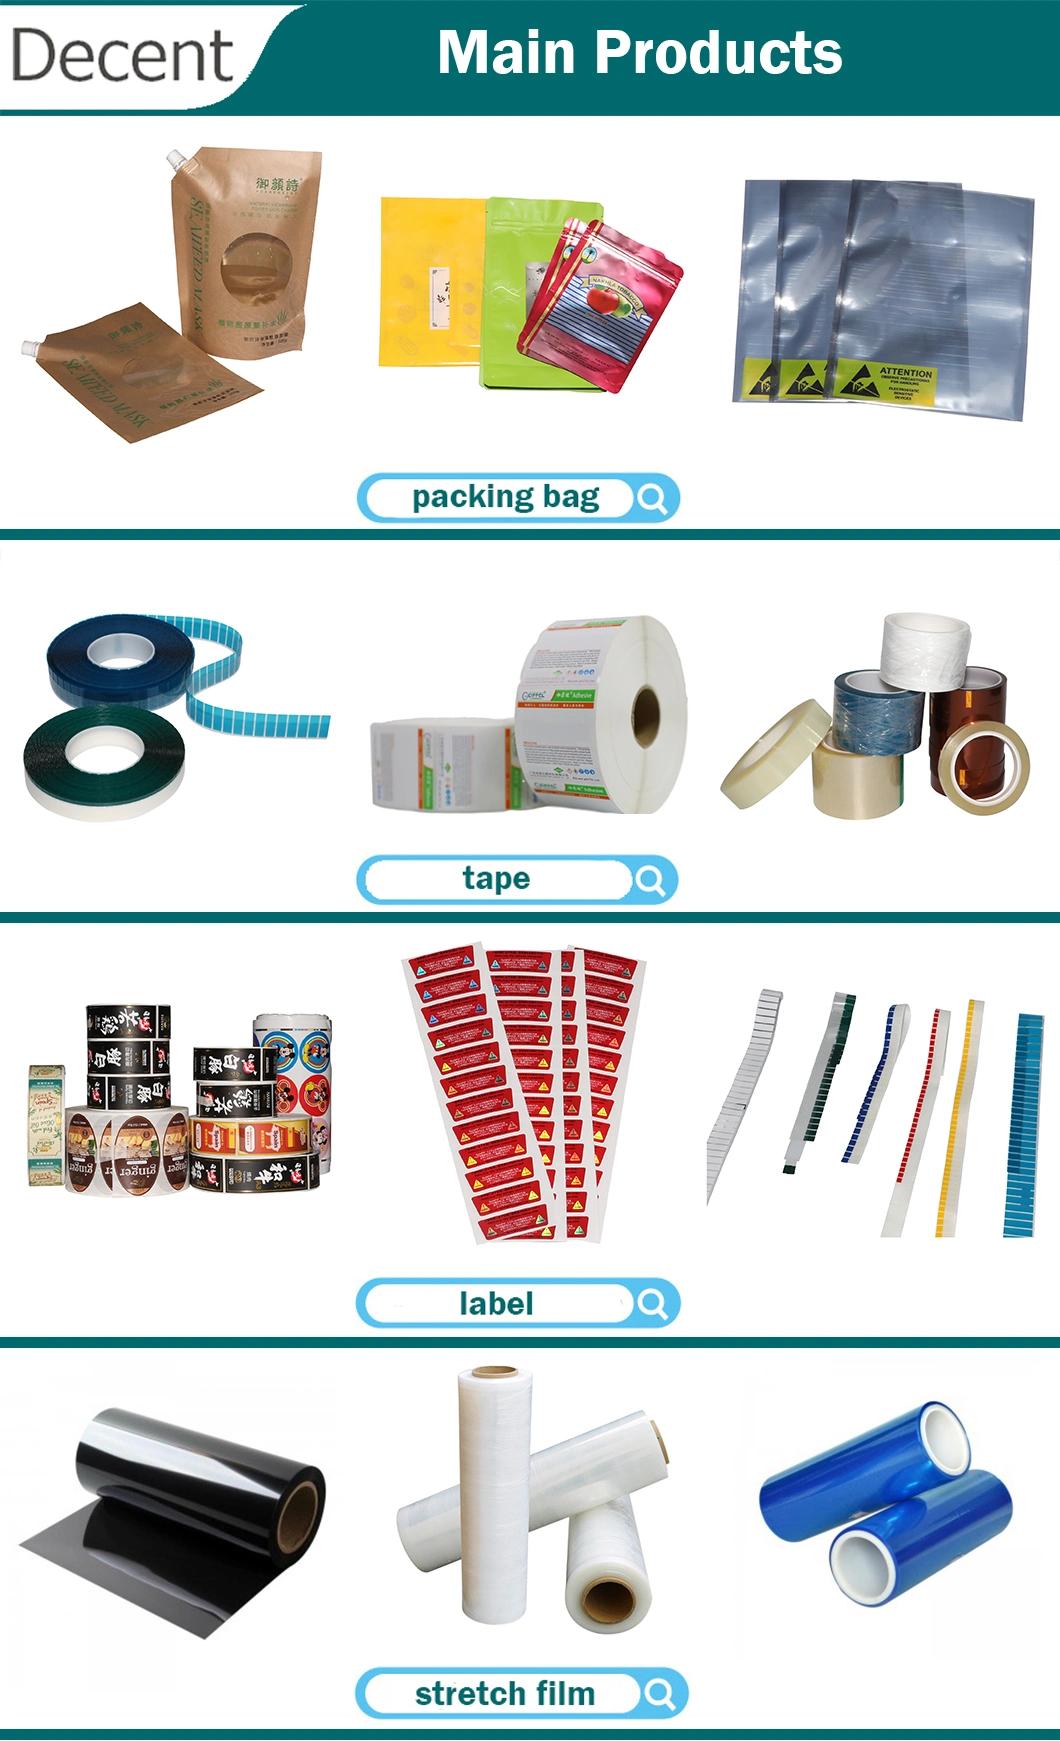 3m Acrylic Foam Vhb Double Sided Tape Double Sided Tape High Adhesive Multiple Surfaces Tapes Acrylic Adhesive Tape